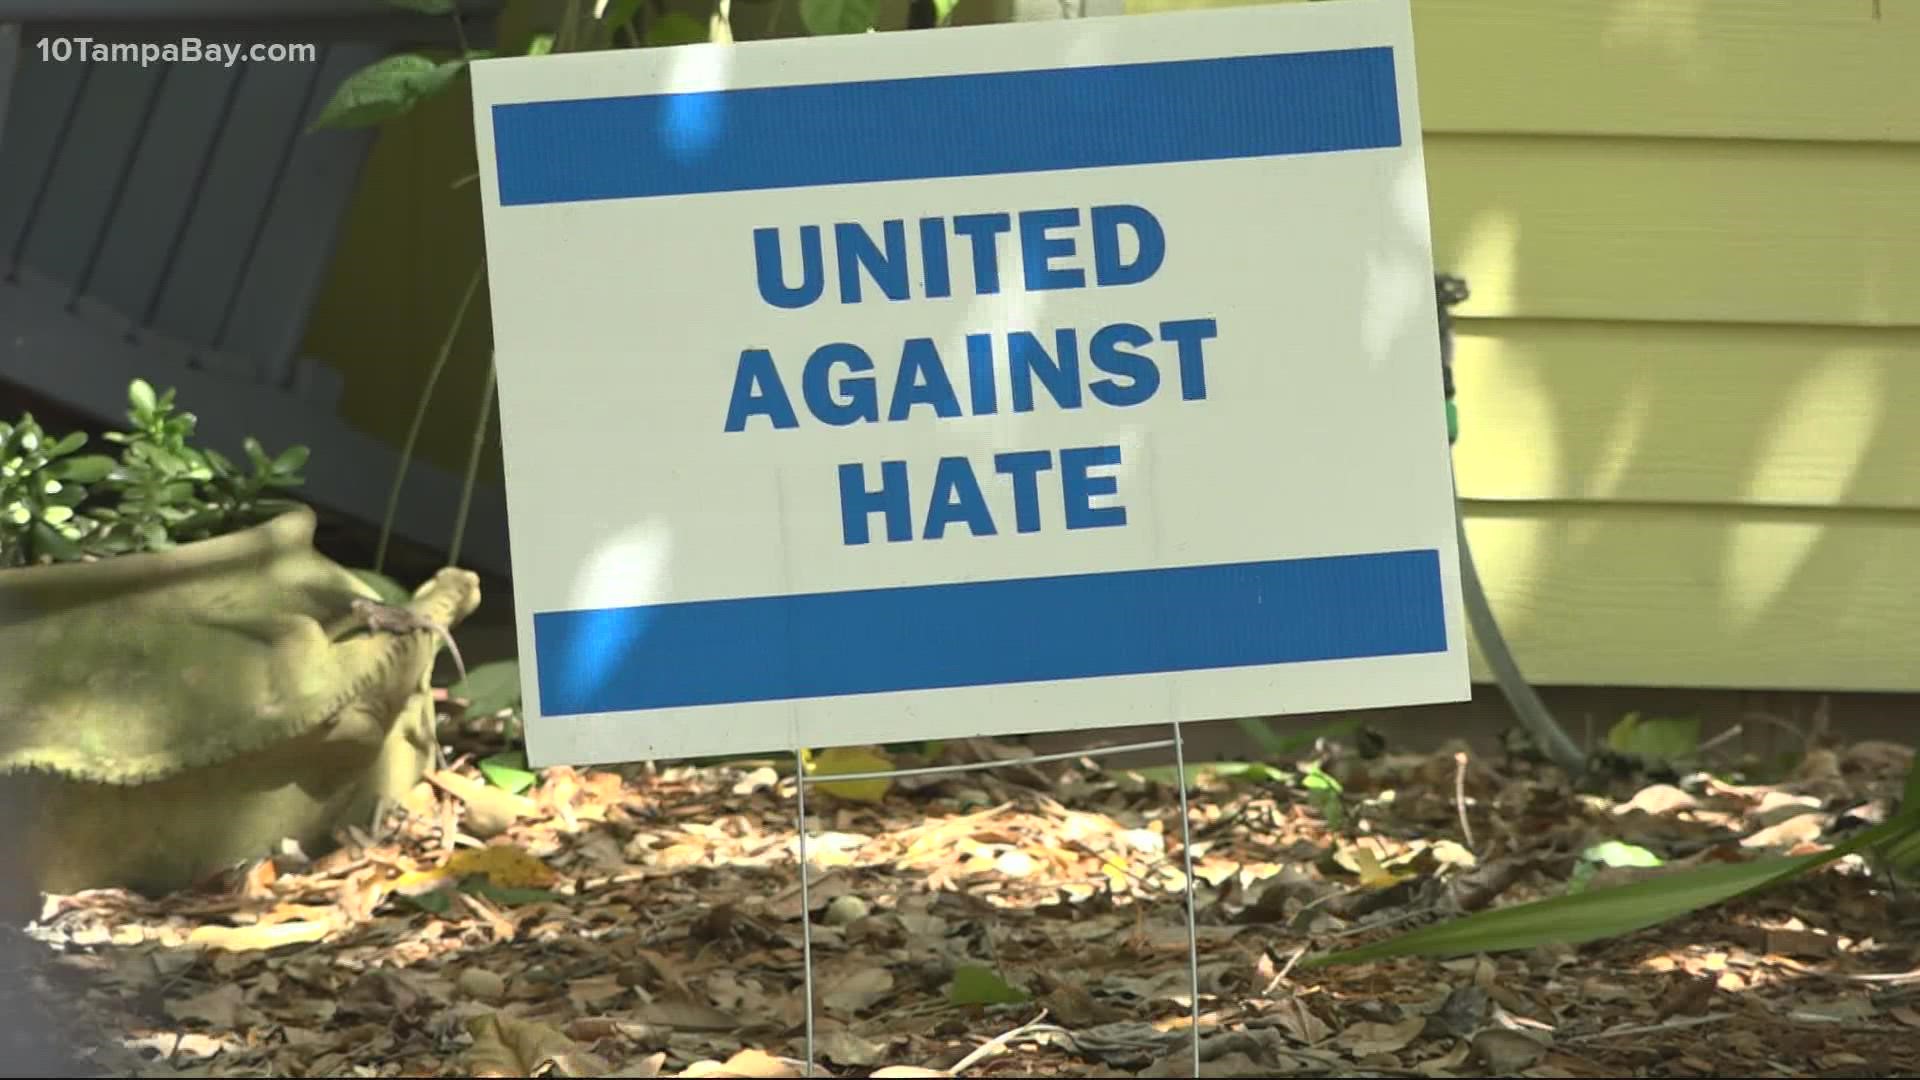 More antisemitic fliers popped up over the weekend in a Sarasota neighborhood.